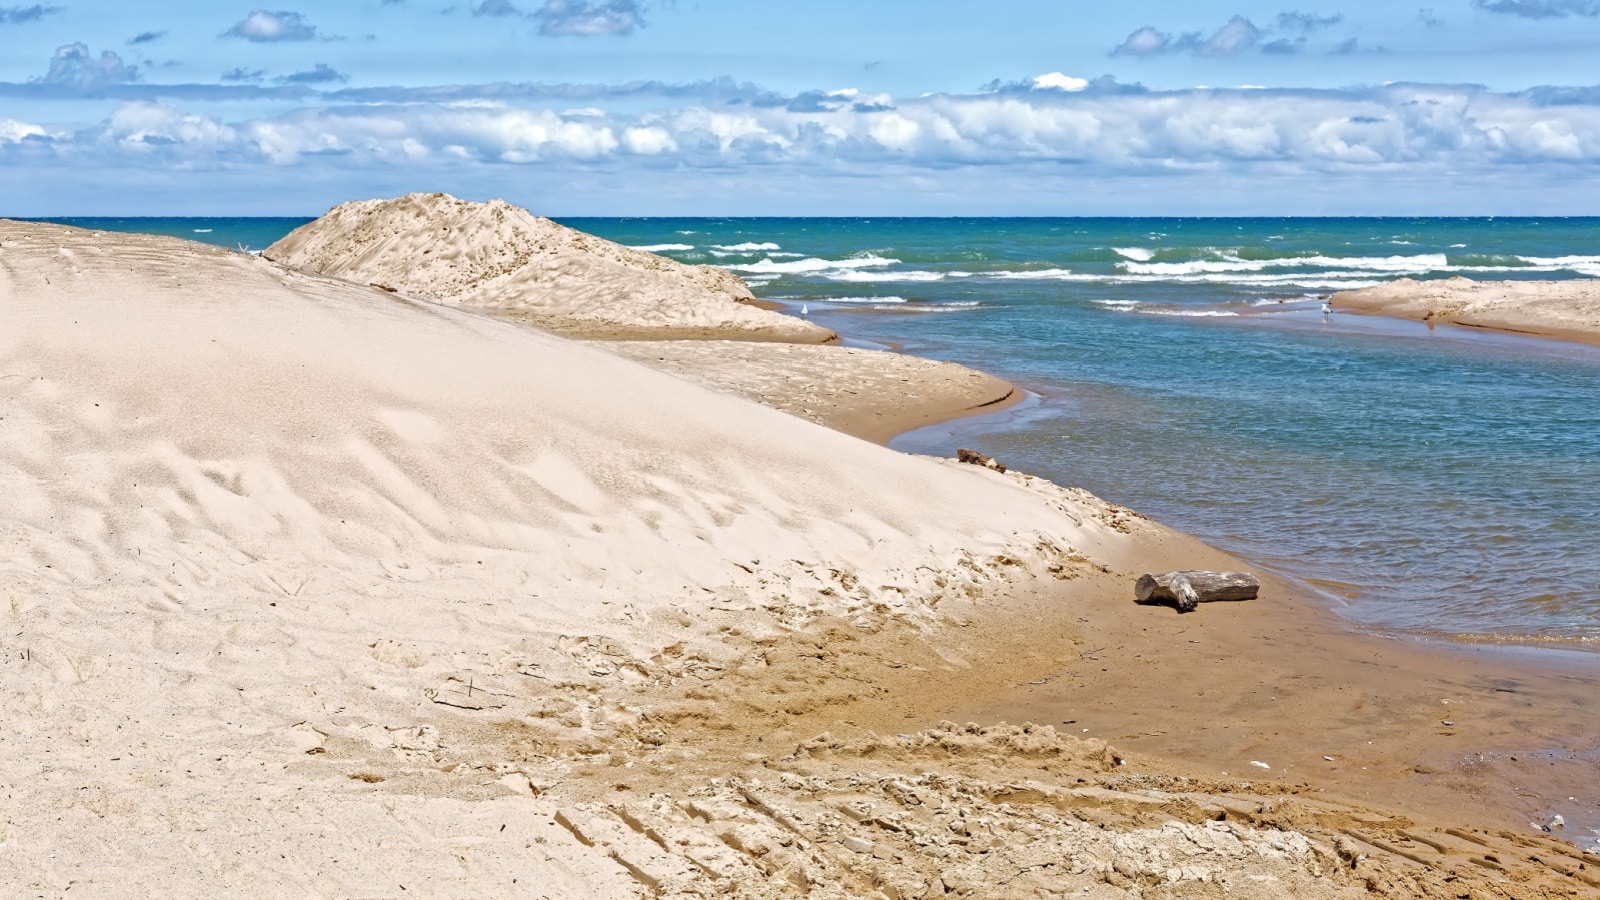 Indiana Dunes National Lakeshore is a National Park on Lake Michigan's south shore. The sand dunes make this beach a popular tourist attraction in Indiana, USA.